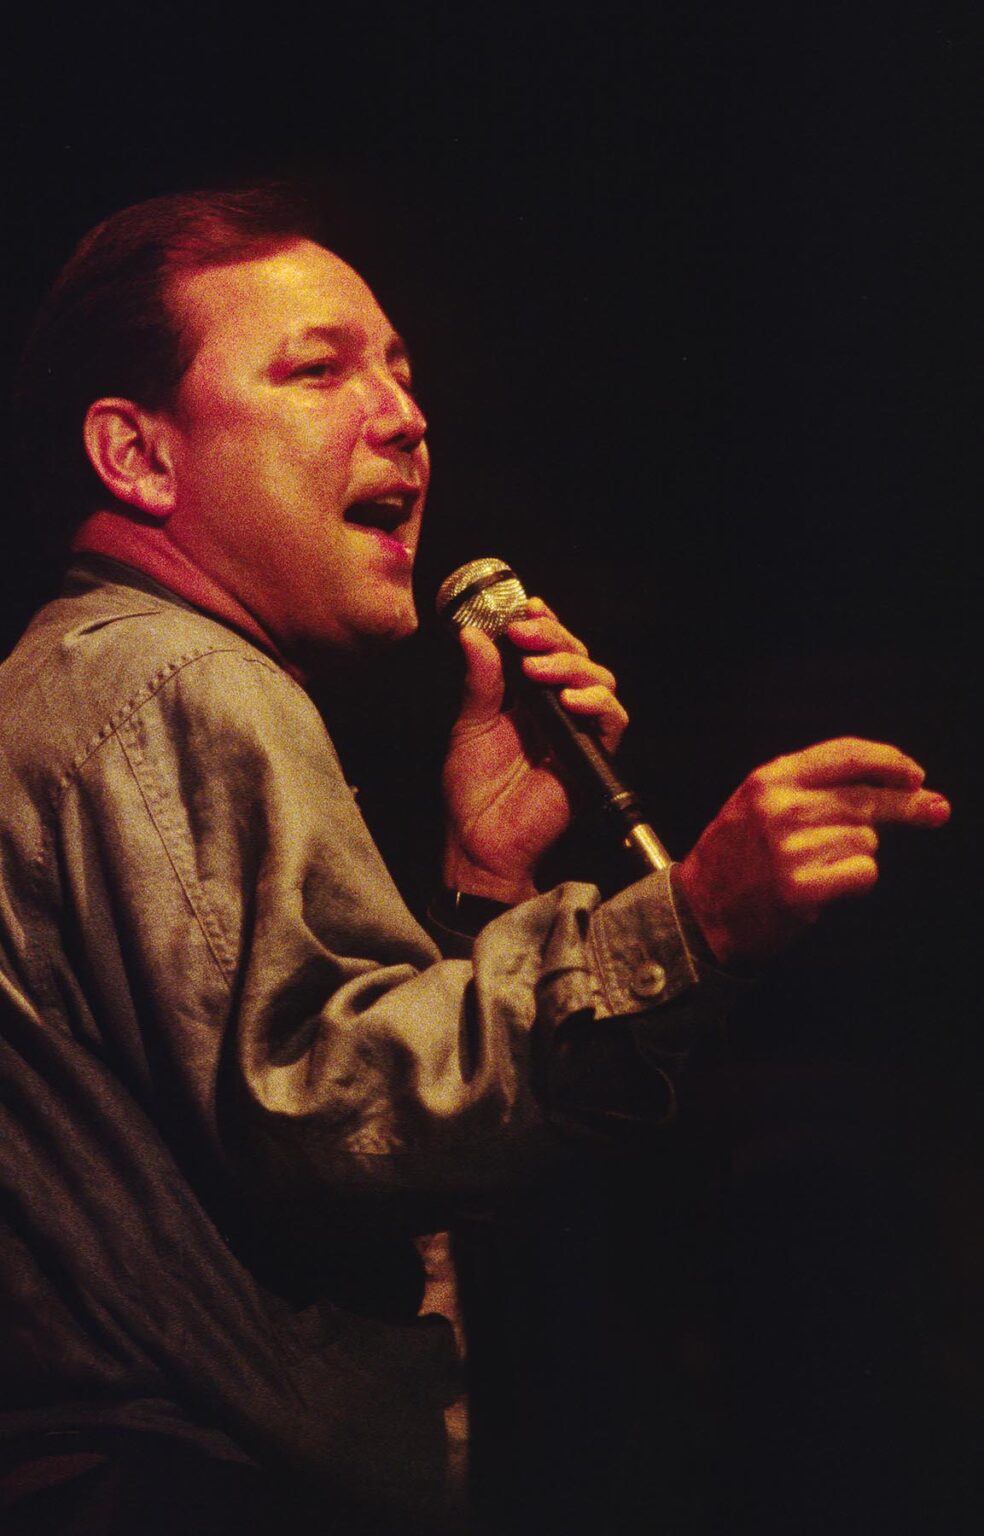 RUBEN BLADES SINGS in front of his band at the MONTEREY JAZZ FESTIVAL - CALIFORNIA